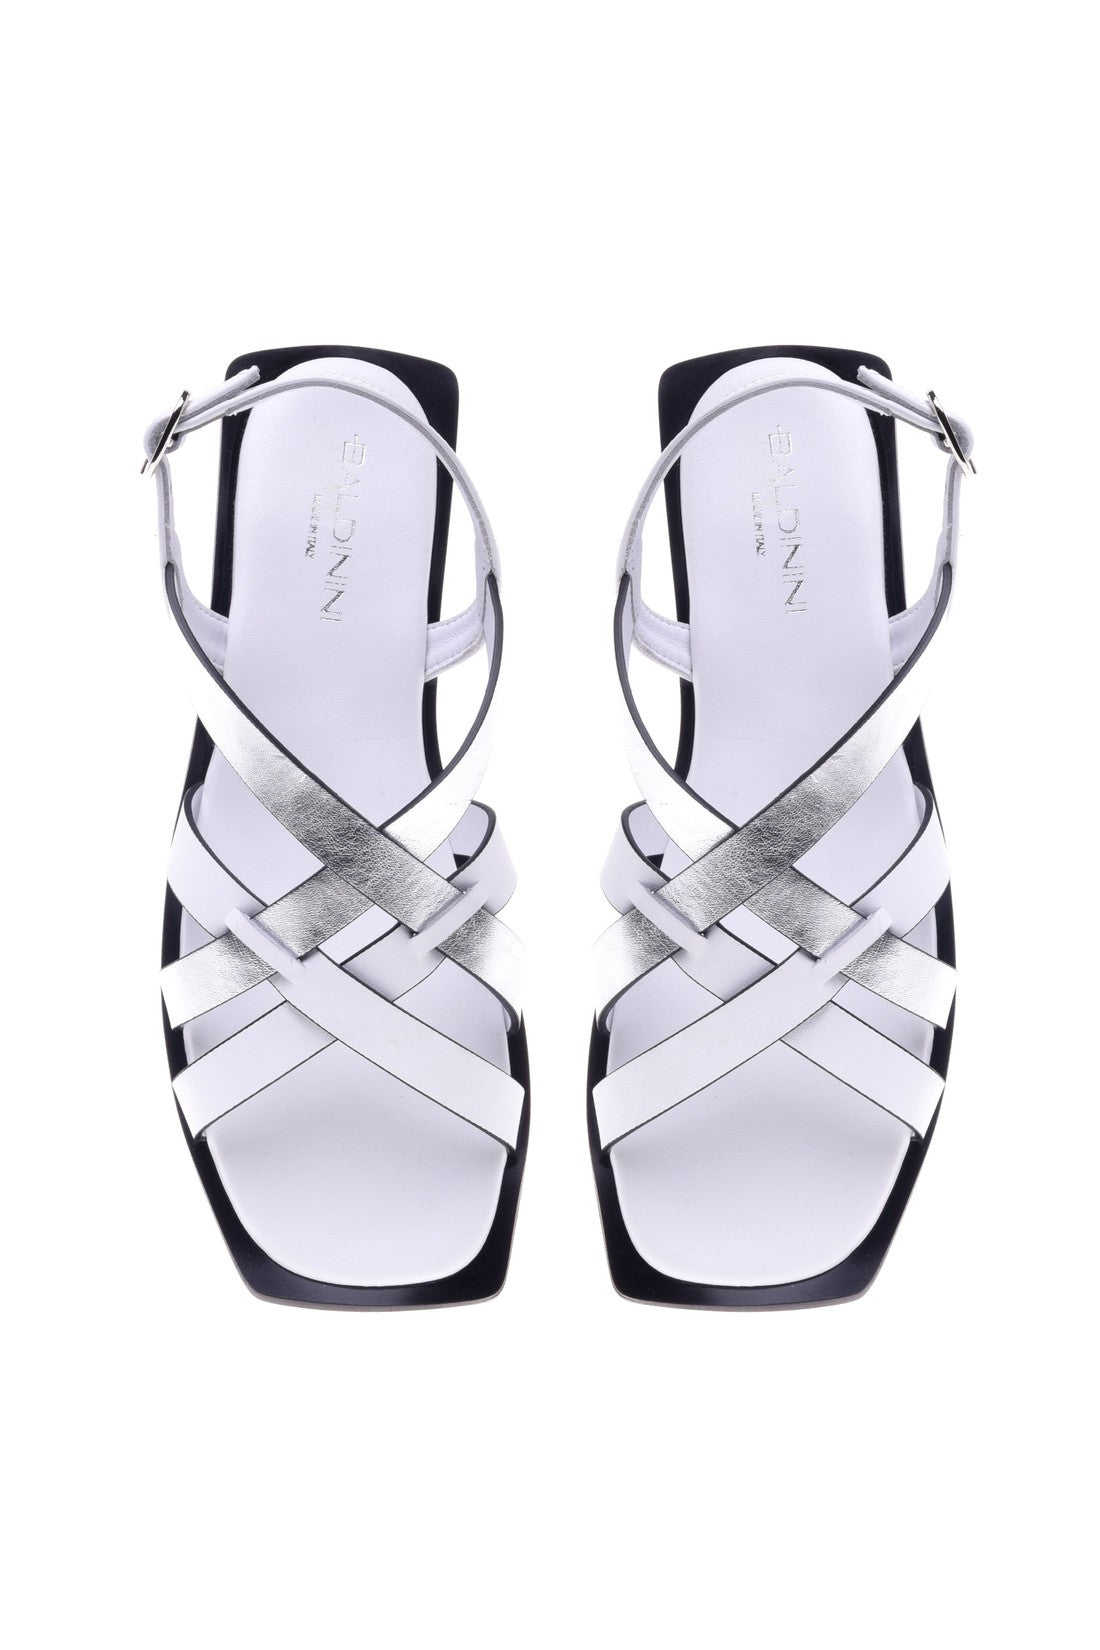 BALDININI-OUTLET-SALE-Sandal-in-white-and-silver-calfskin-Sandalen-ARCHIVE-COLLECTION-2.jpg